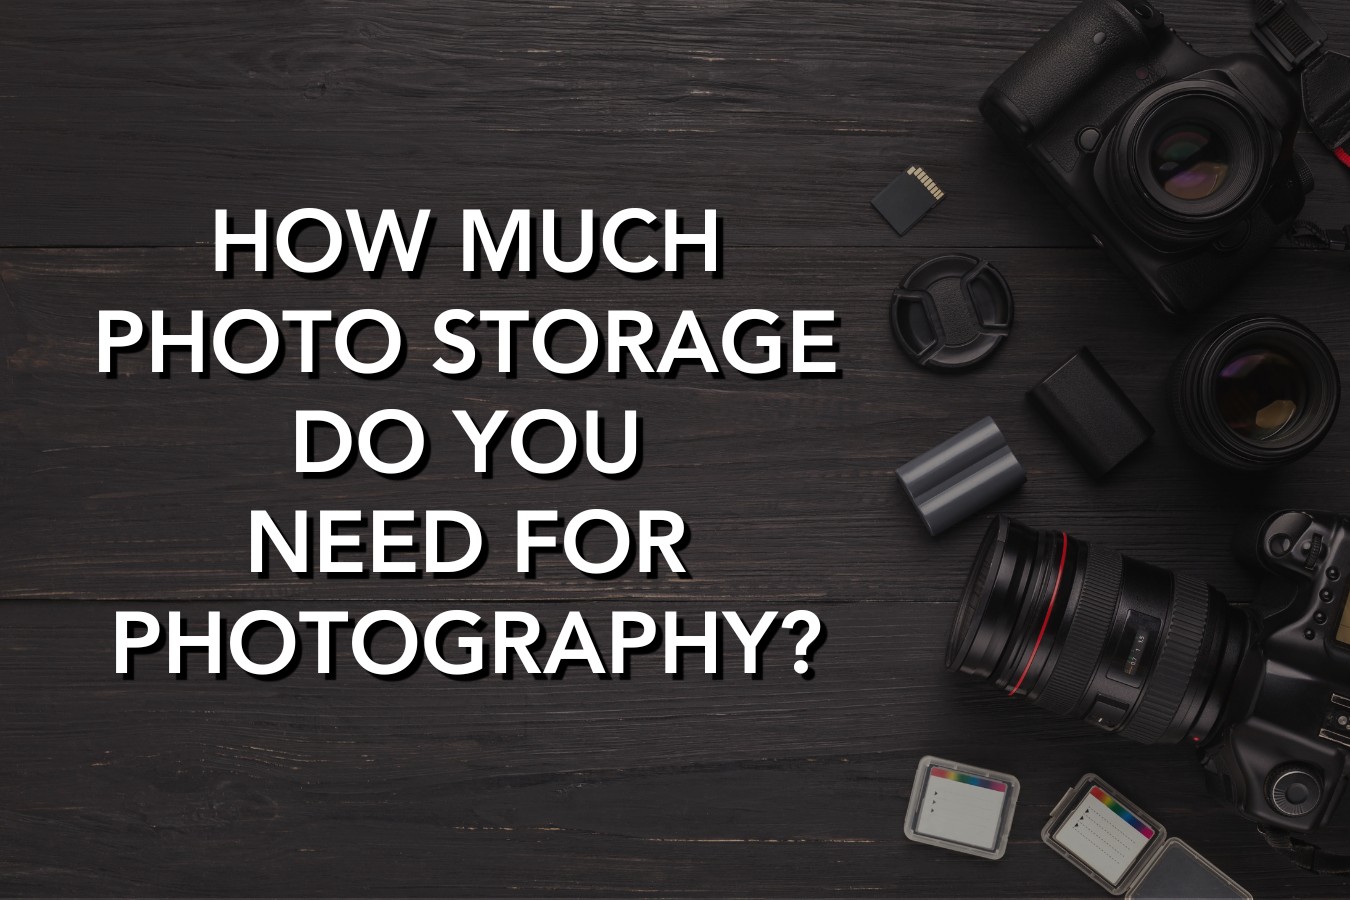 How much photo storage do you need for photography?